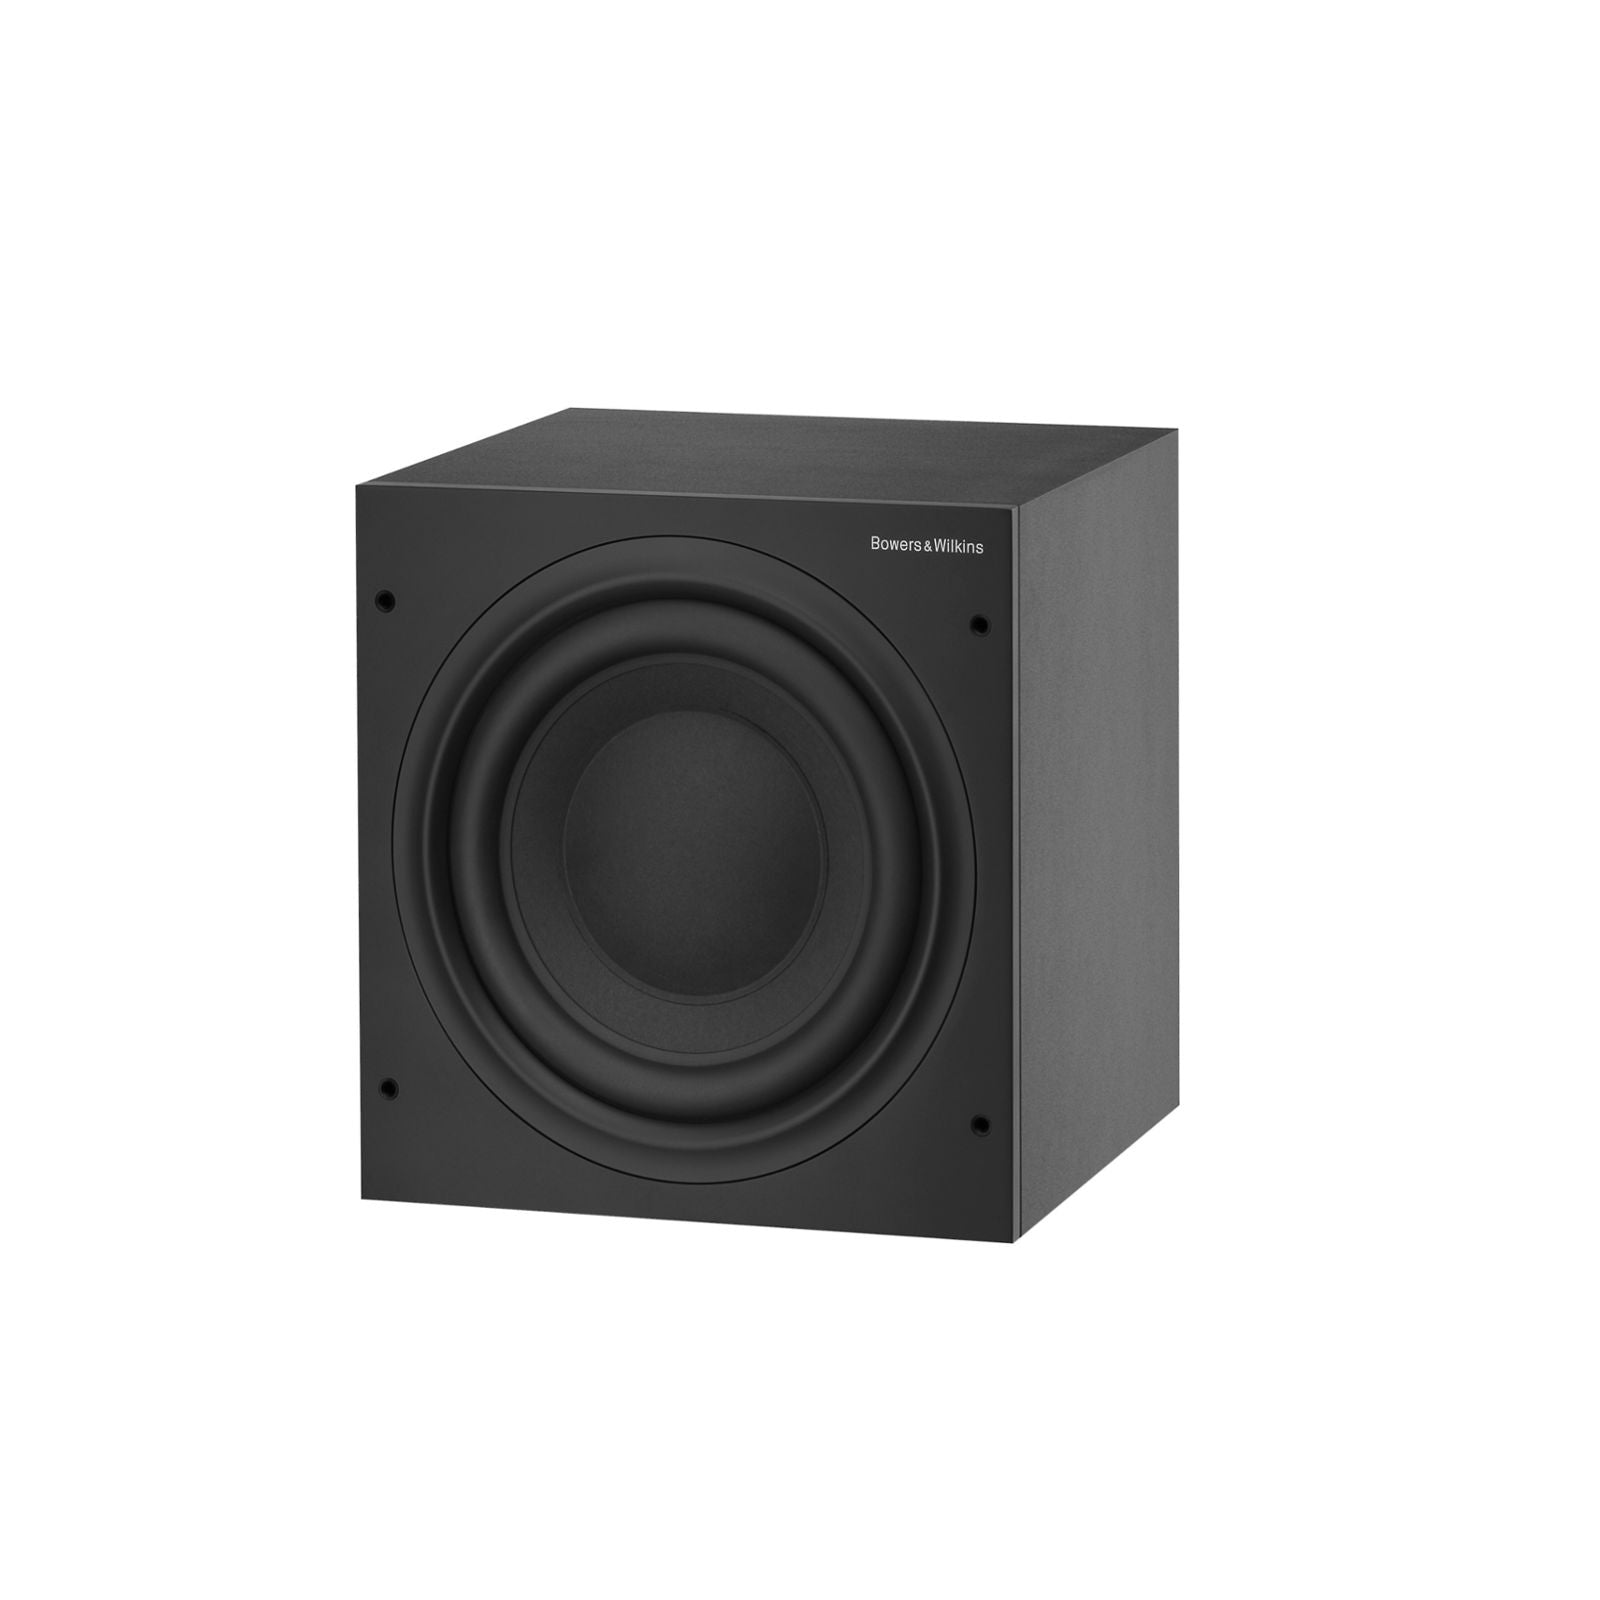 Bowers & Wilkins ASW610XP 500 Watts Subwoofer - Ooberpad